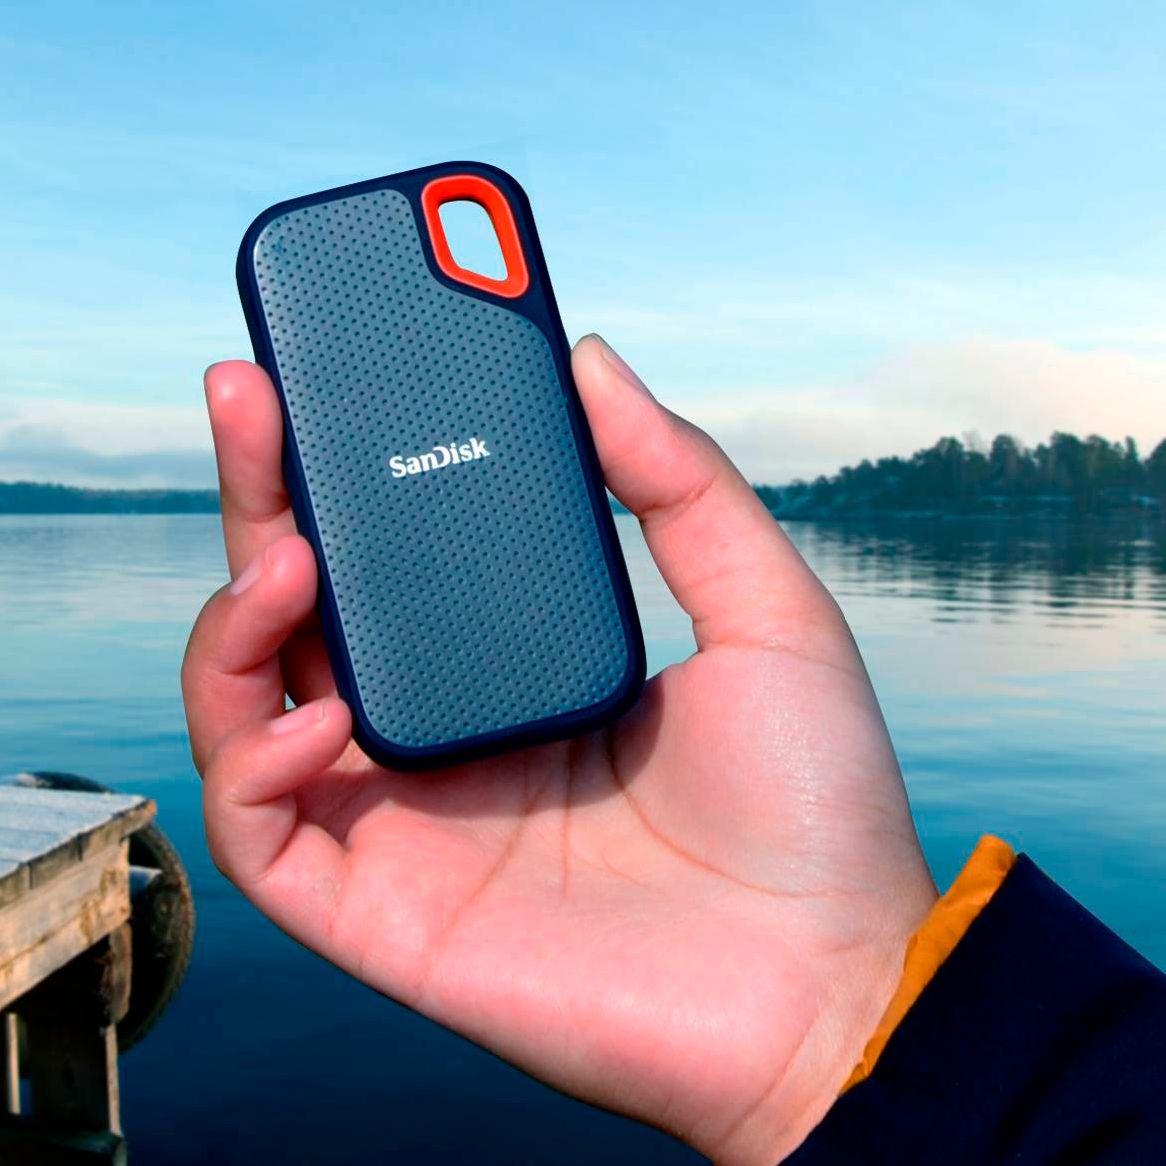 SanDisk 1TB Extreme Portable External SSD - Up to 550MB/s - USB-C, USB 3.1